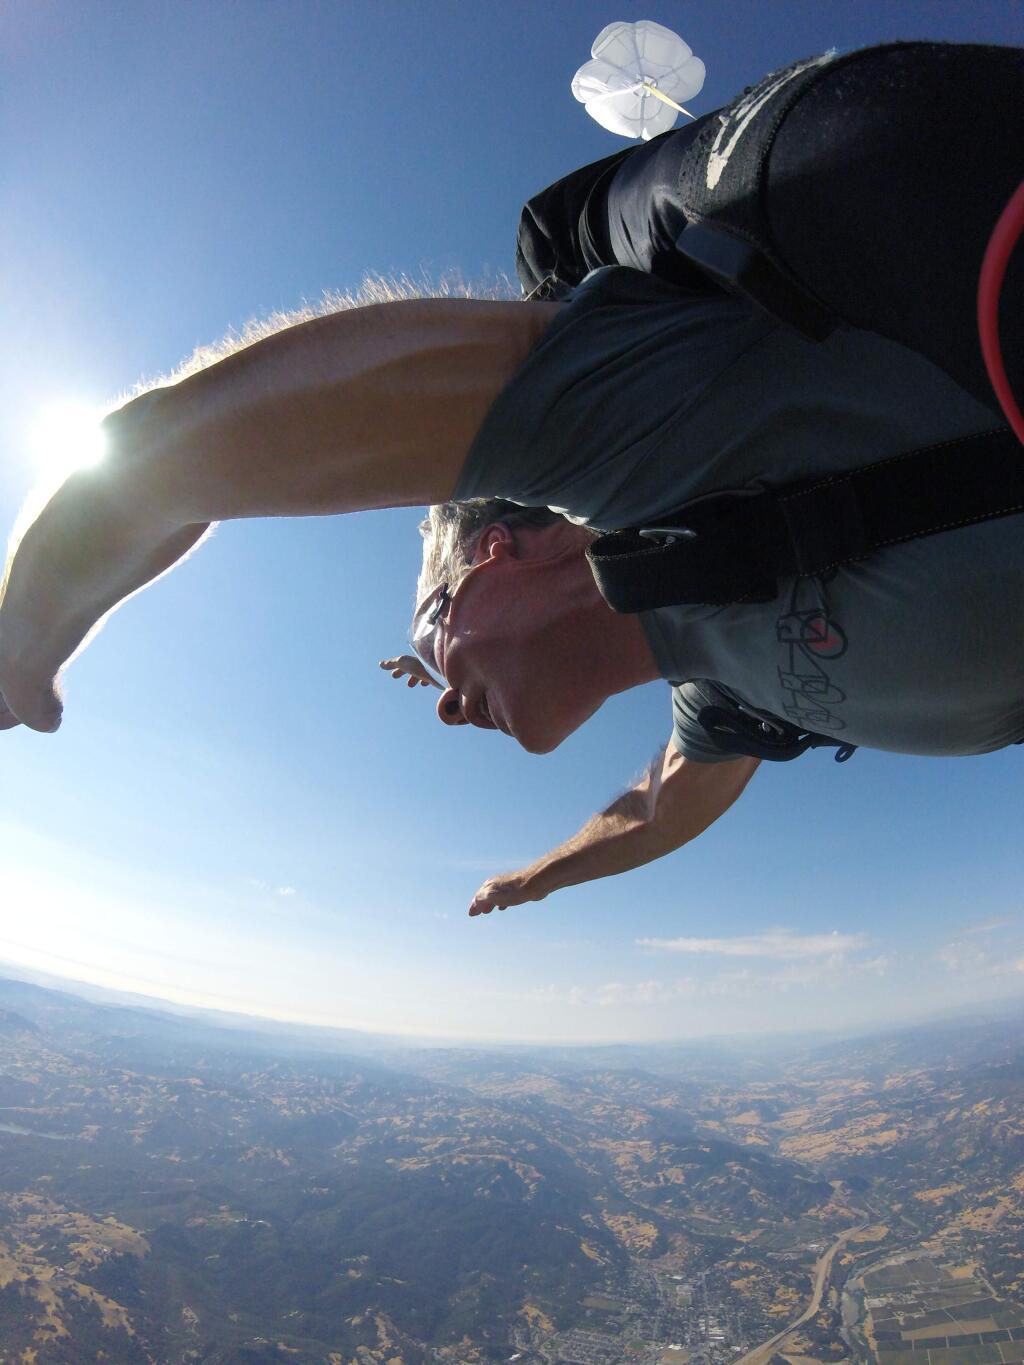 After much hemming and hawing, Clark Mason goes airborne over Cloverdale. (Photo courtesy of NorCal Skydiving)